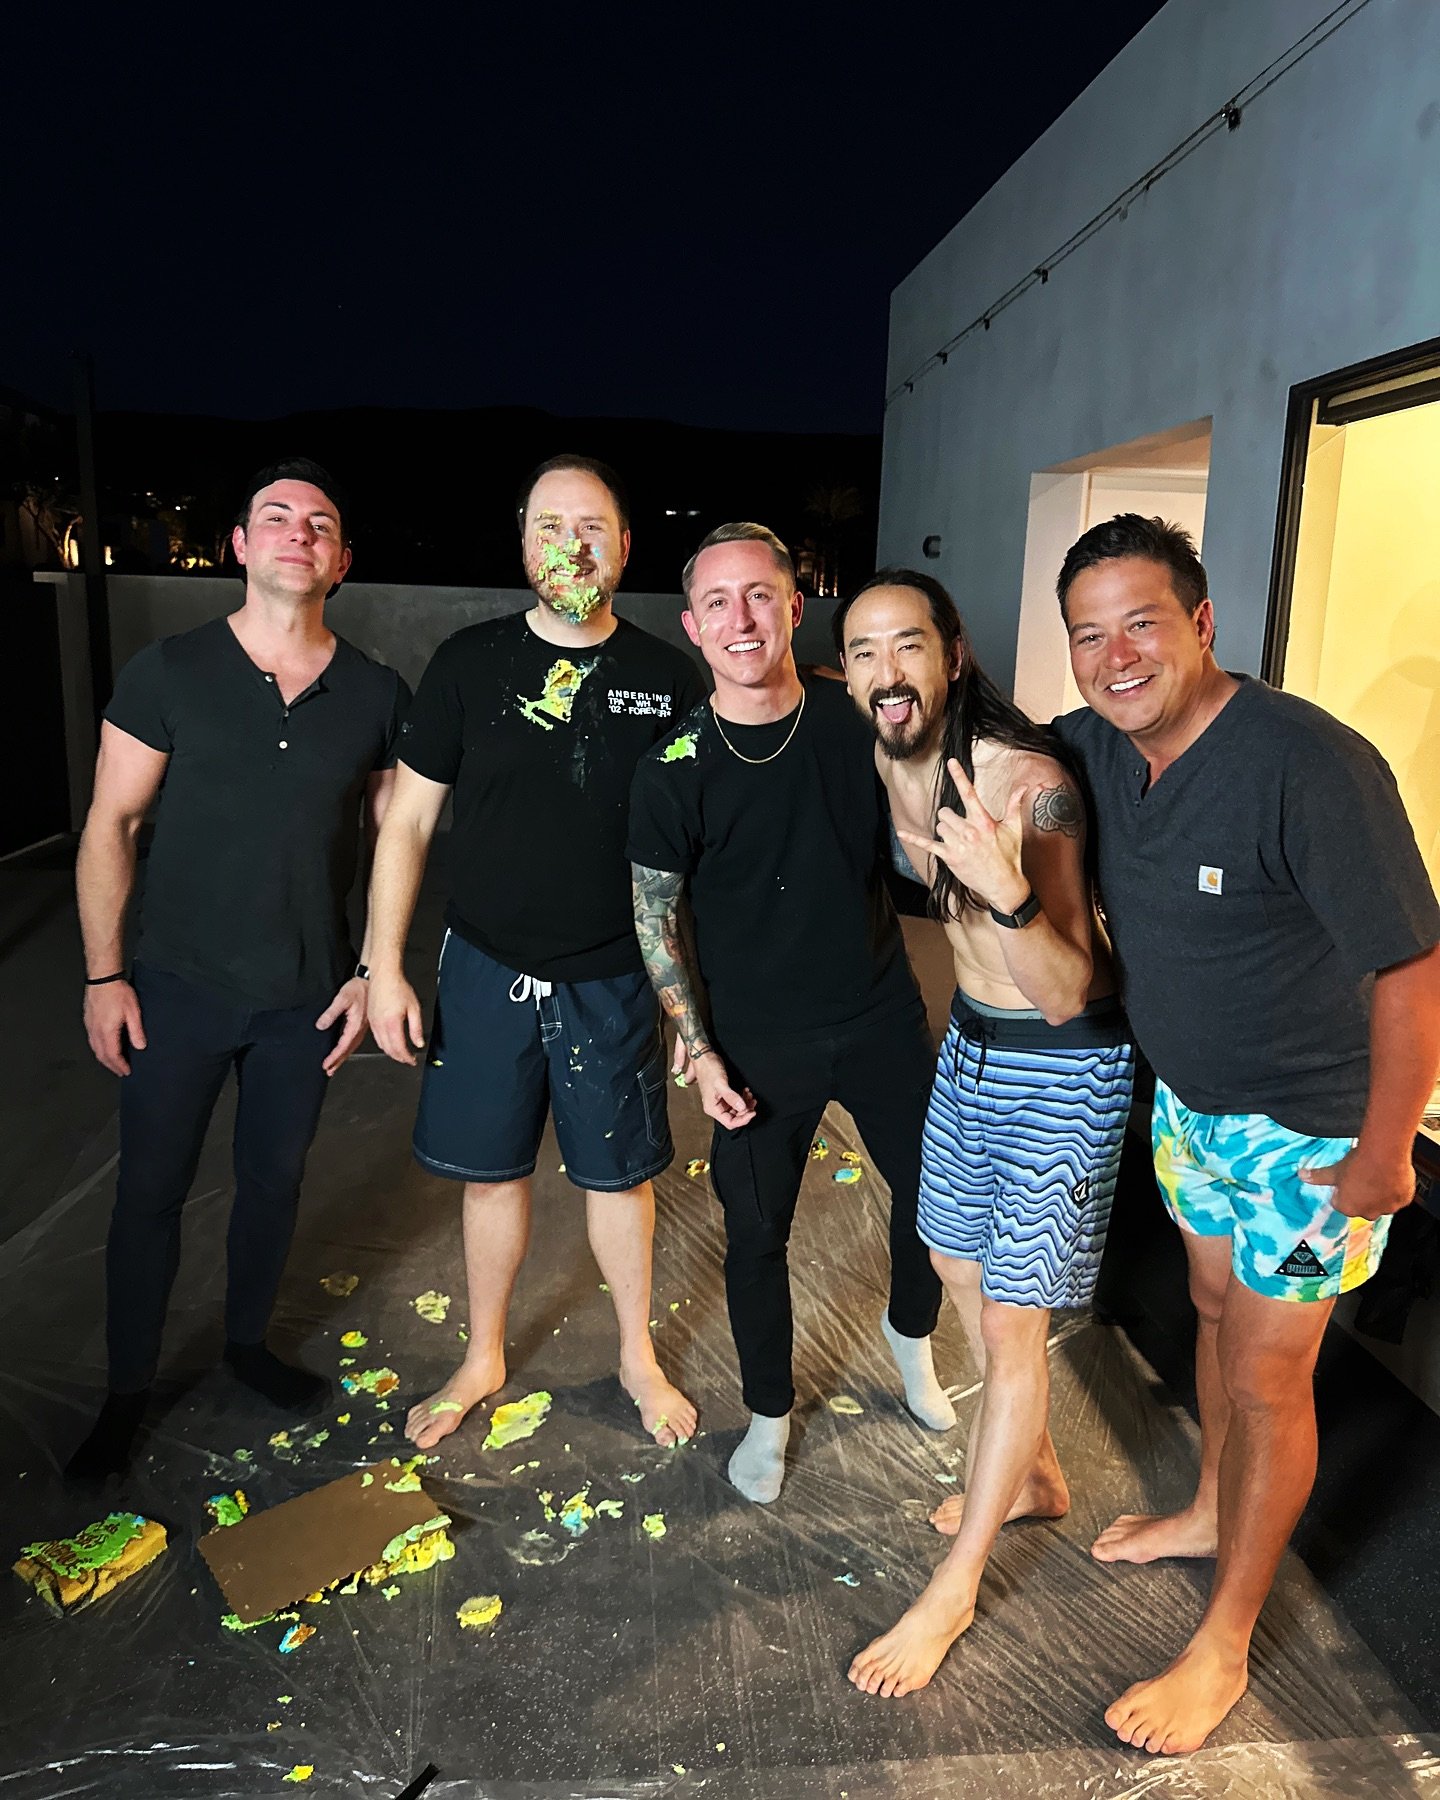 That time we got caked by @steveaoki 🎂 #oceanavenue 
&bull;
&bull;
&bull;
#yellowcard #yellowcardband #steveaoki #poppunk #emo #remix 📸 Acacia Evans